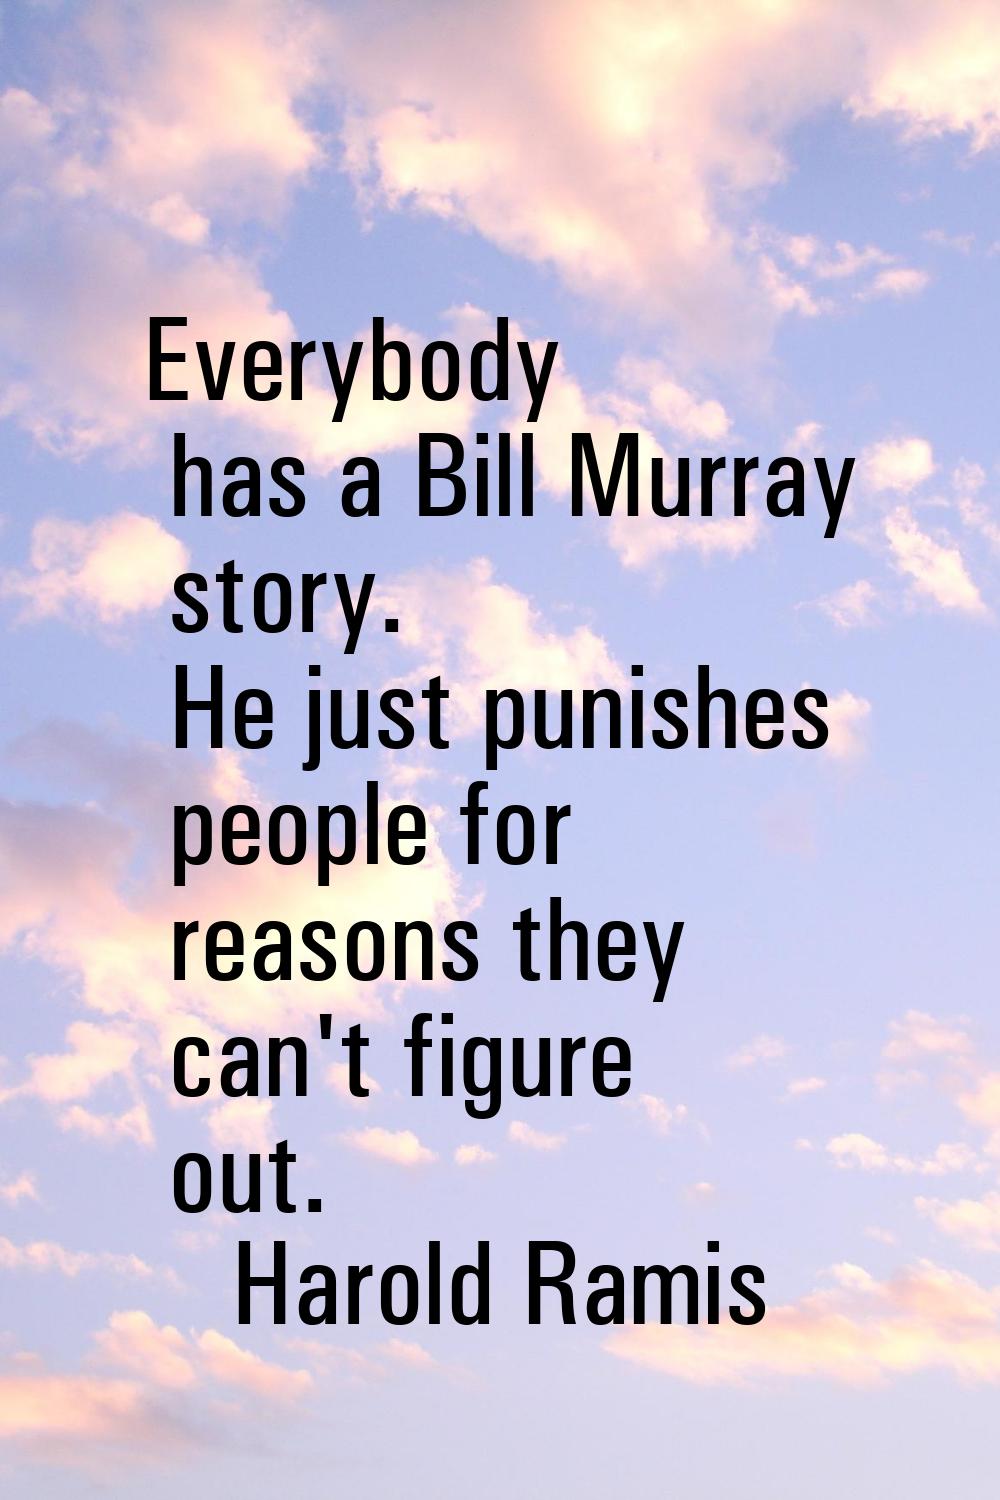 Everybody has a Bill Murray story. He just punishes people for reasons they can't figure out.